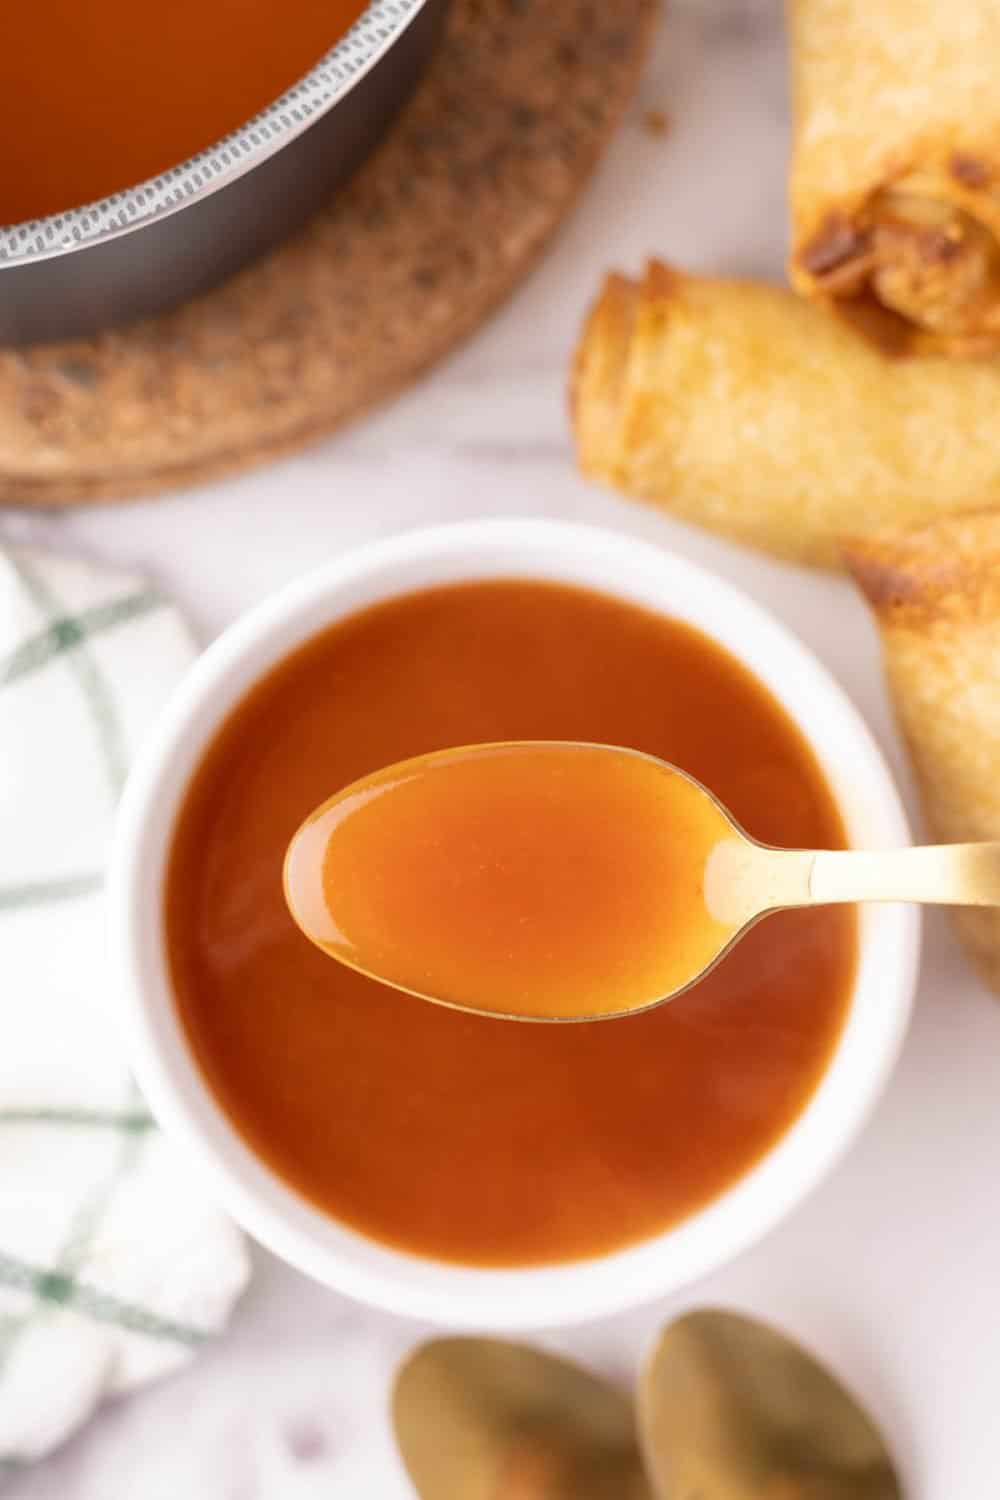 Spoonful of sweet and sour sauce. 